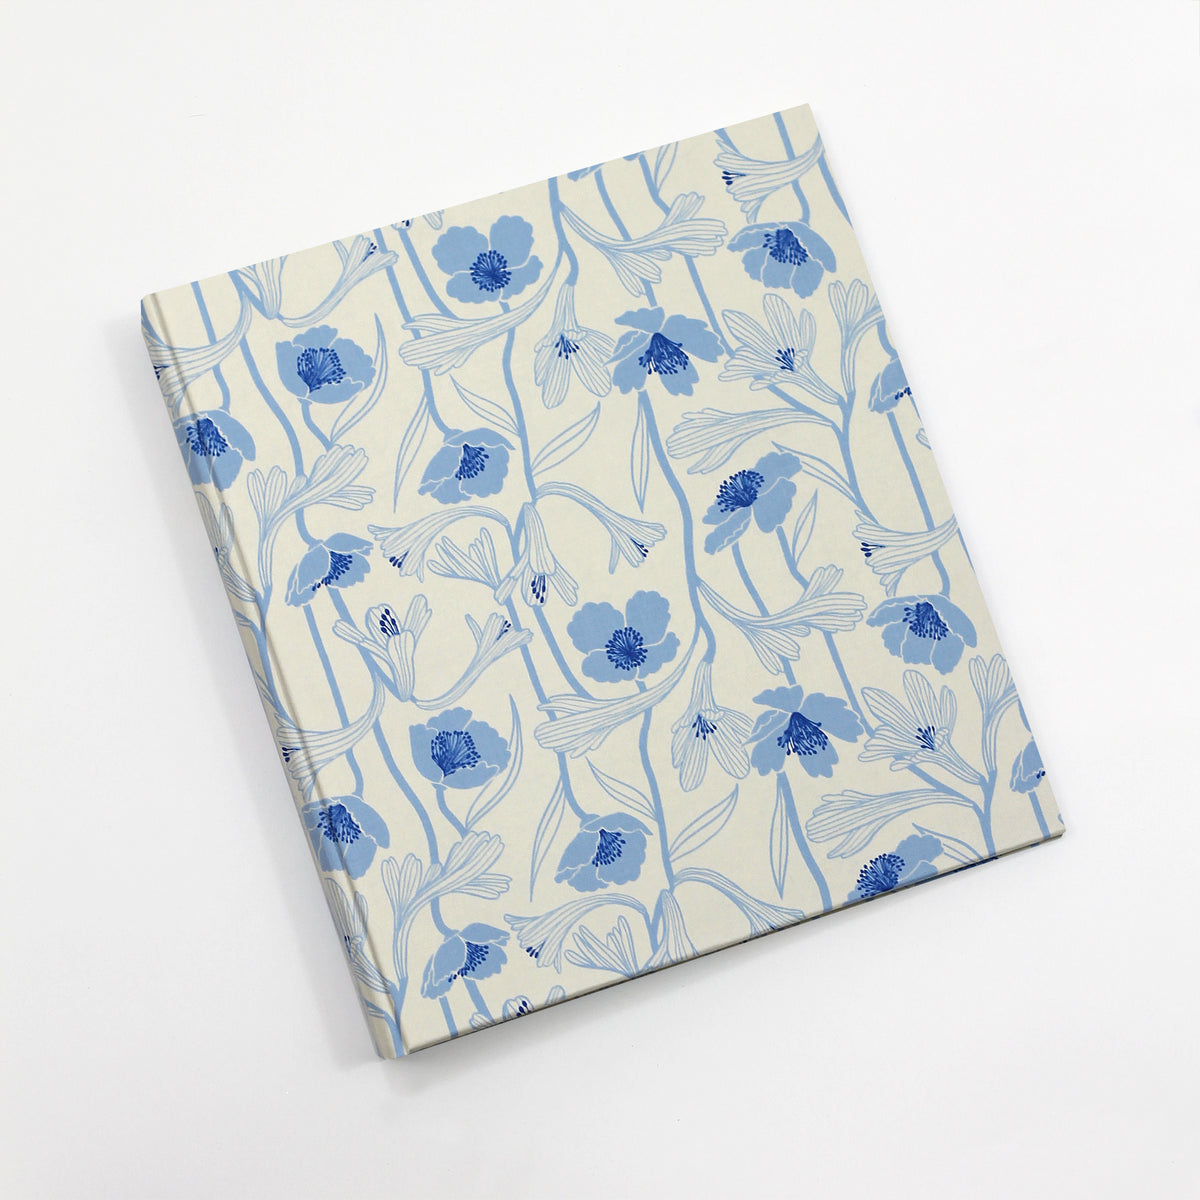 Storage Binder for Photos or Documents | Limited Edition Cover: Water Flowers White